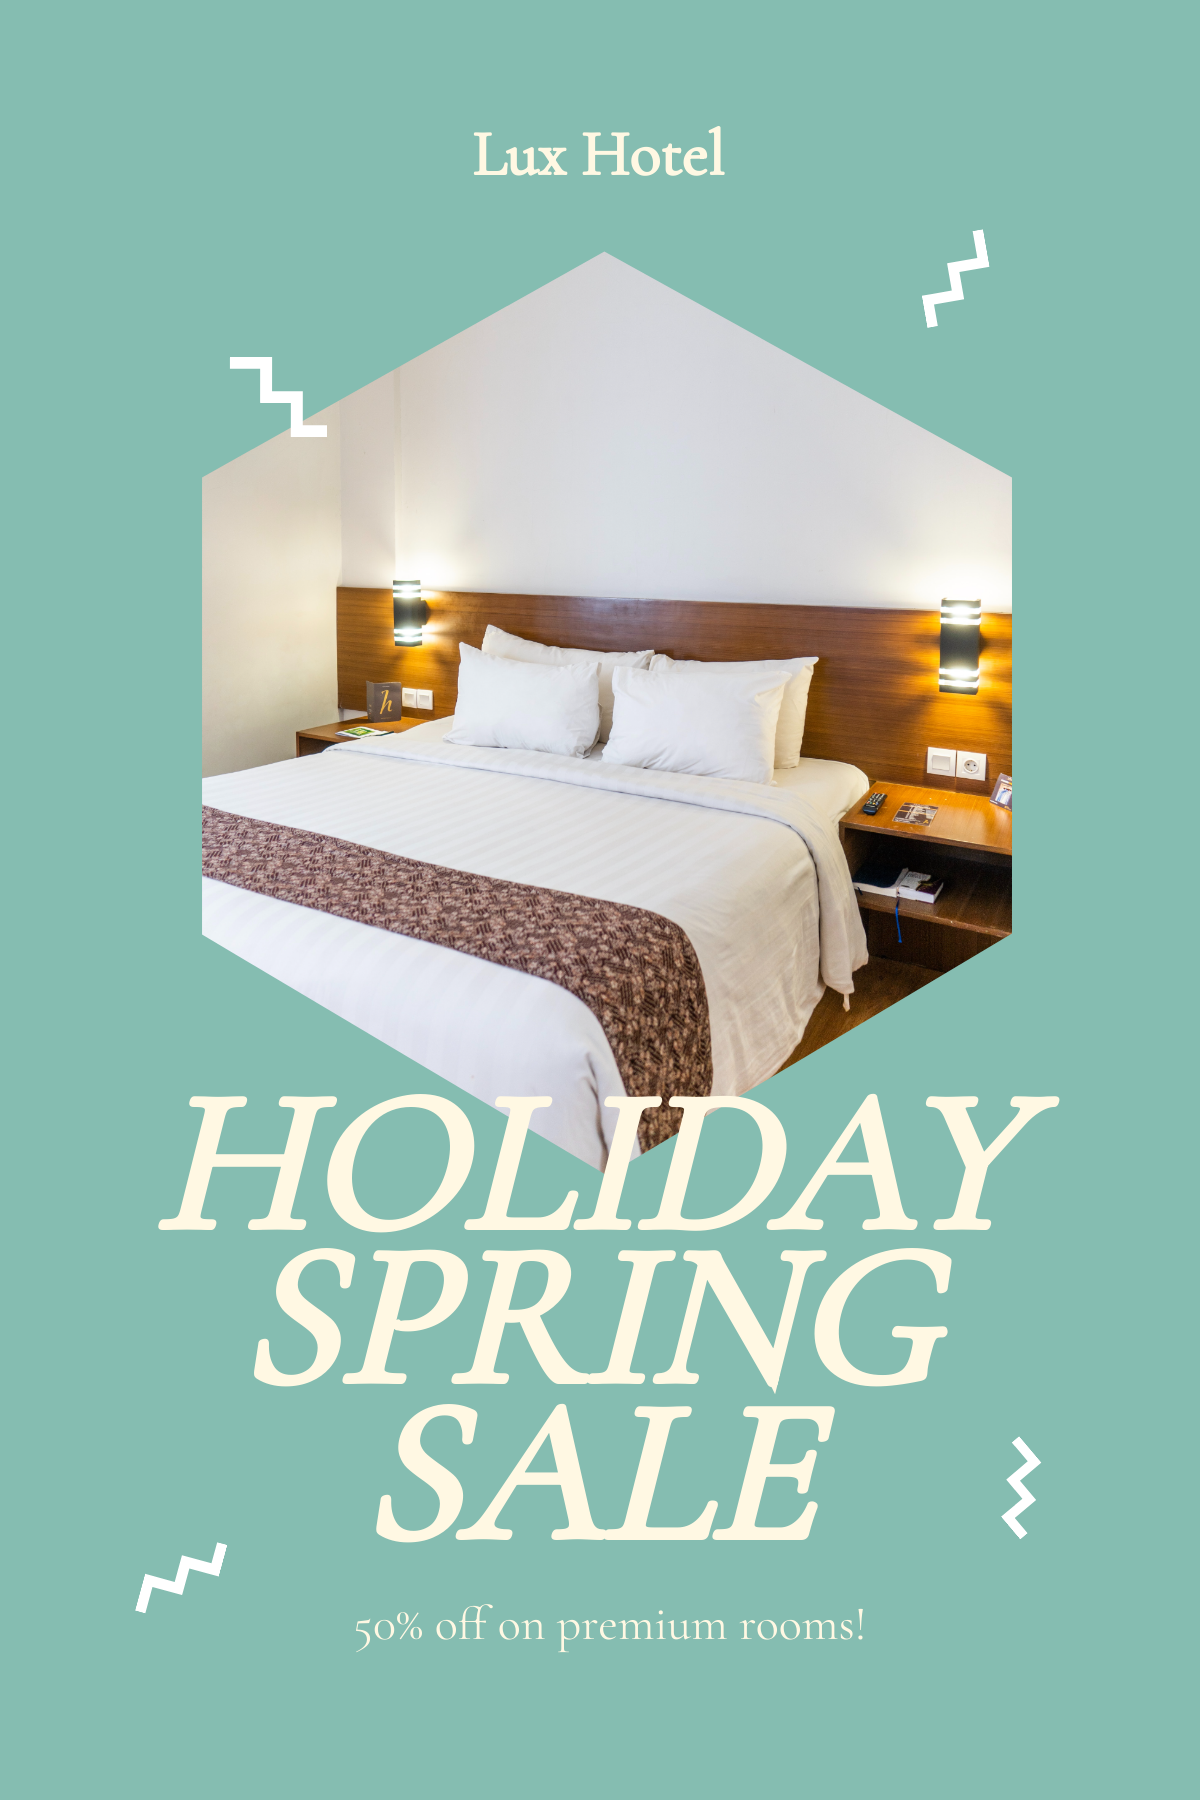 Free Holiday Spring Offer Sale Pinterest Pin Template